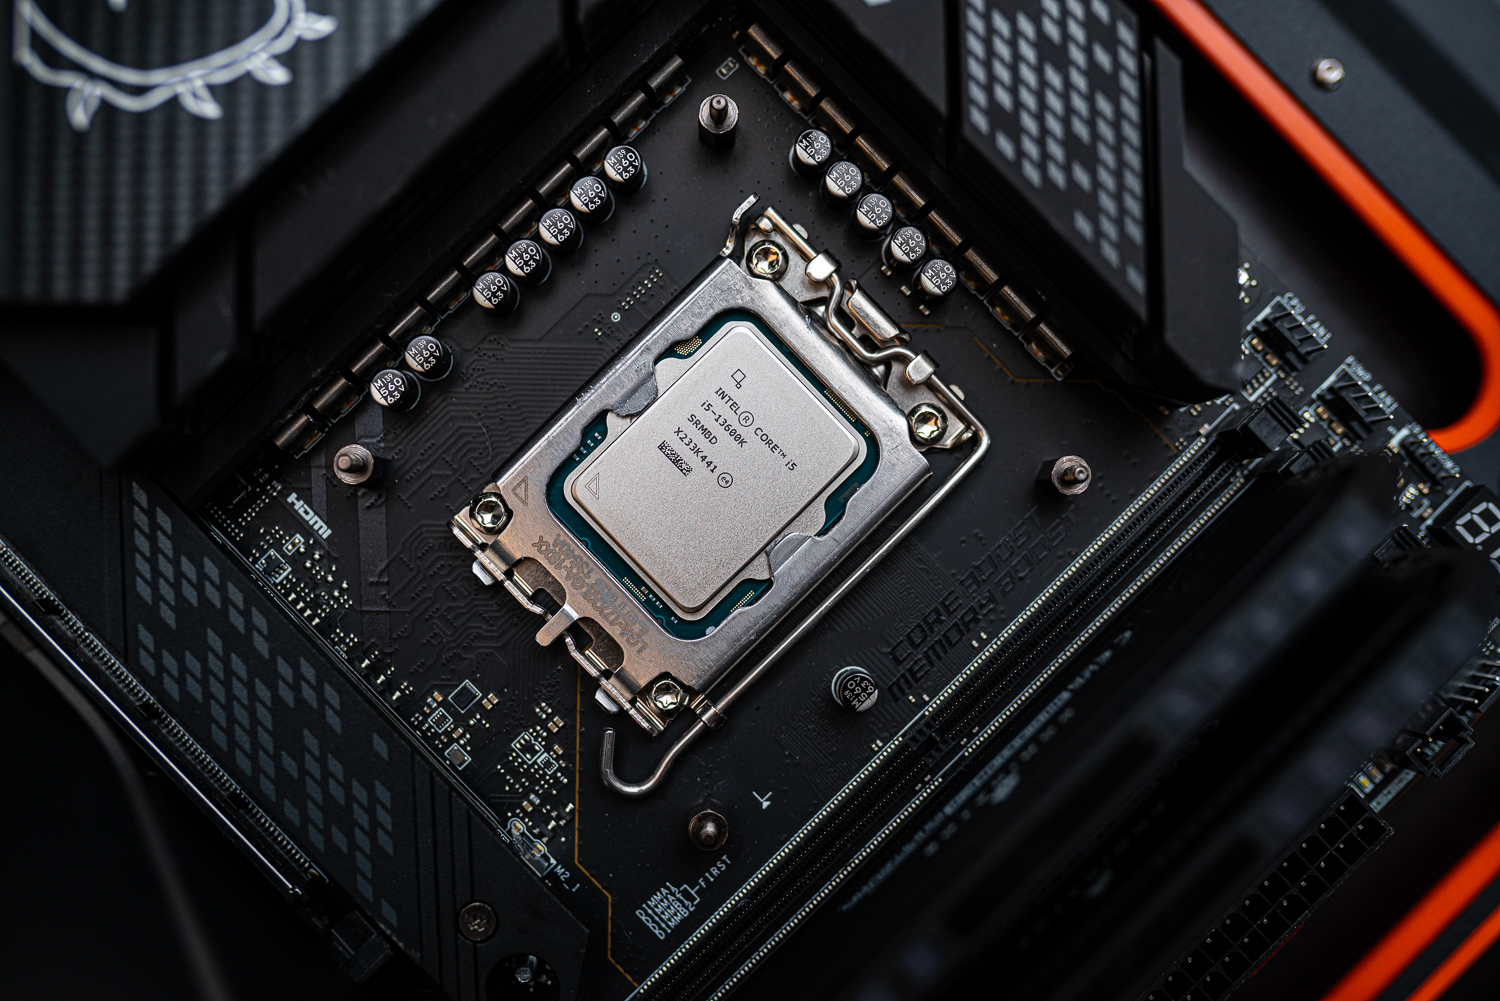 Intel Takes back CPU market share at Steam